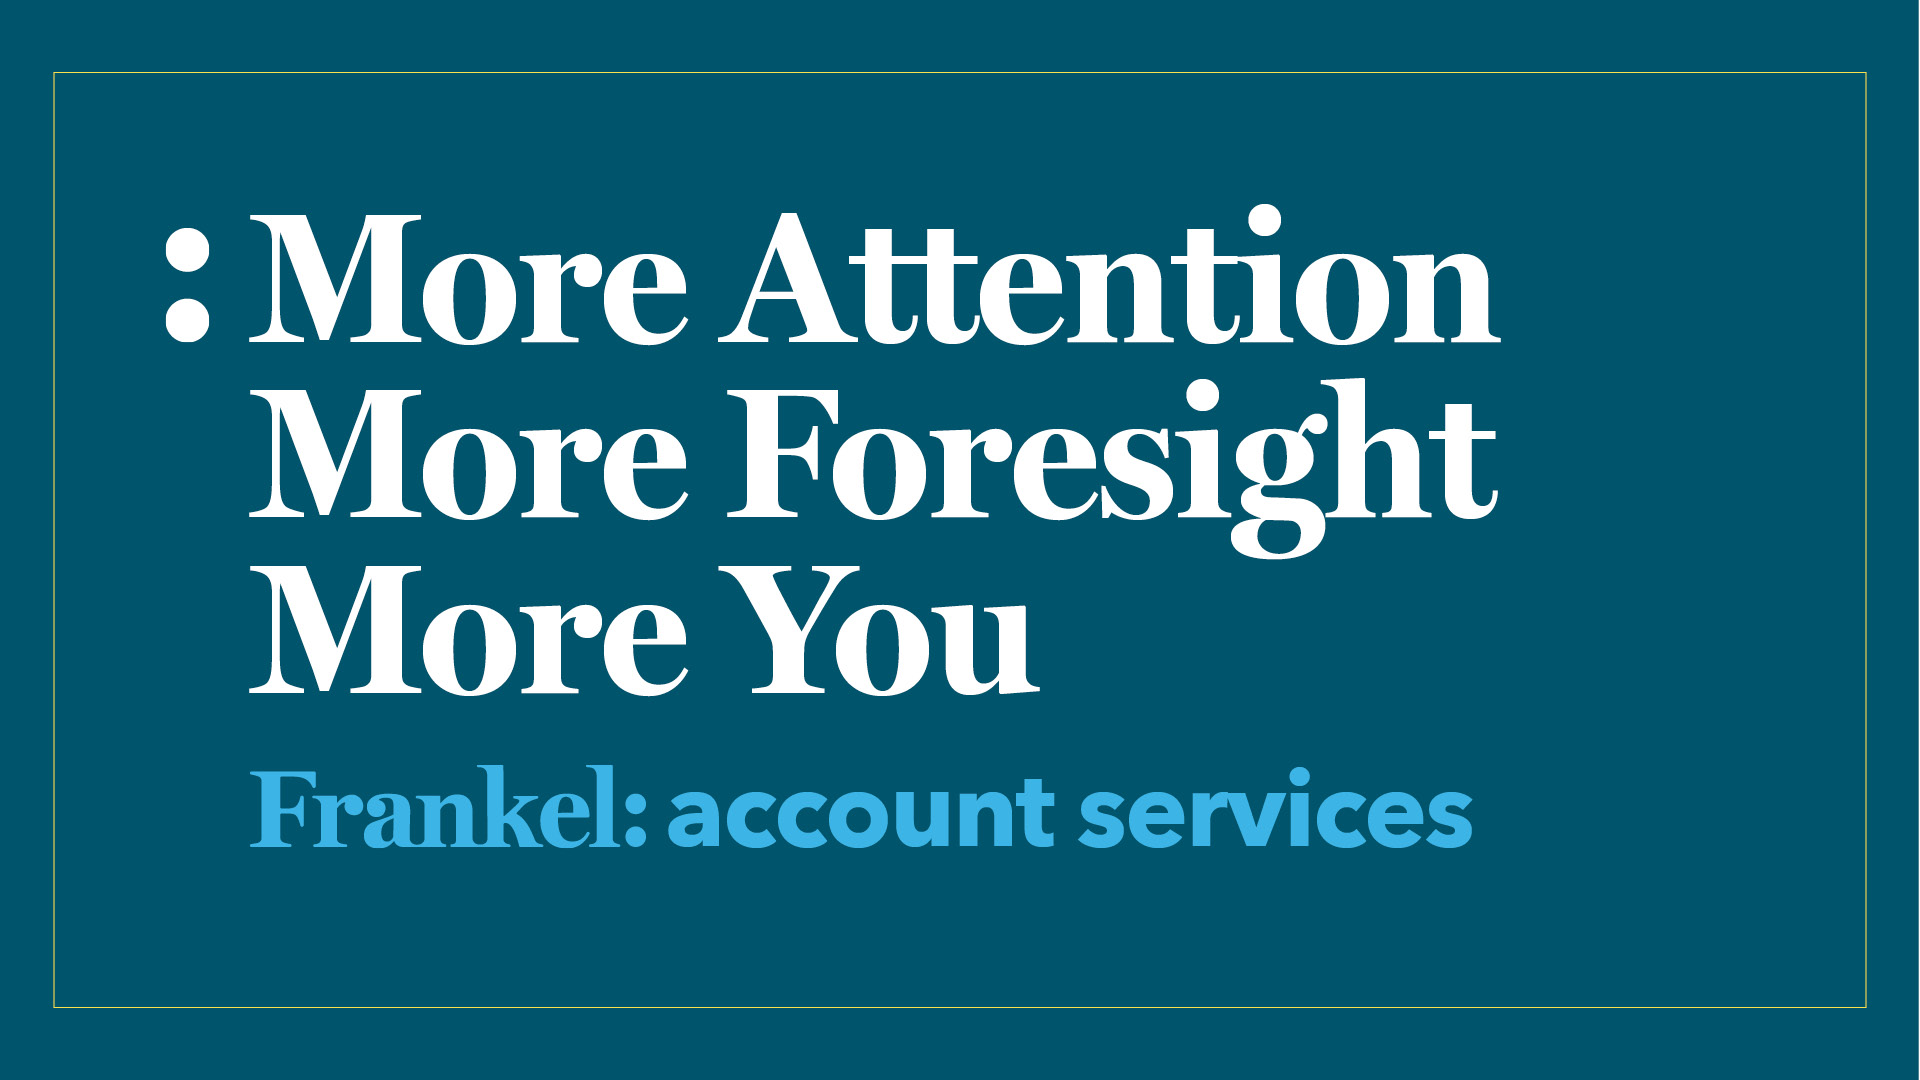 Frankel Agency Account Services